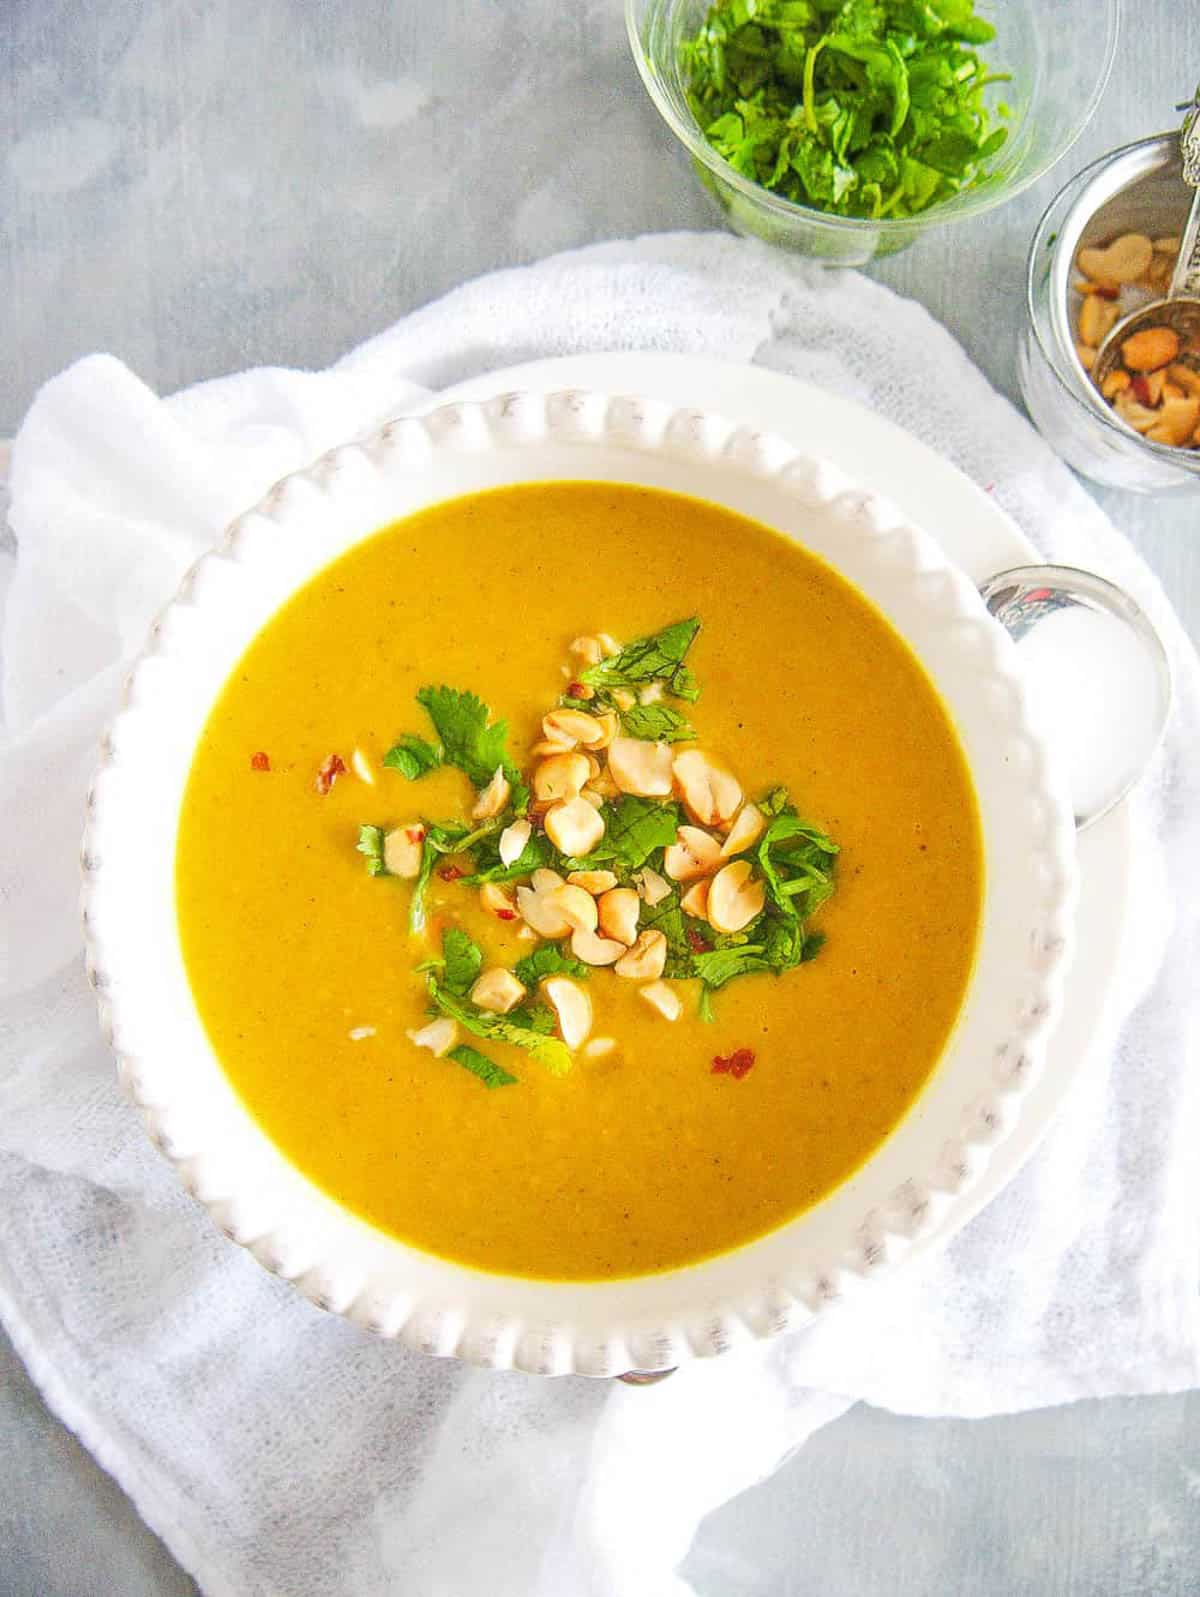 Curried cauliflower soup topped with crushed cashews and cilantro, served in a white bowl.